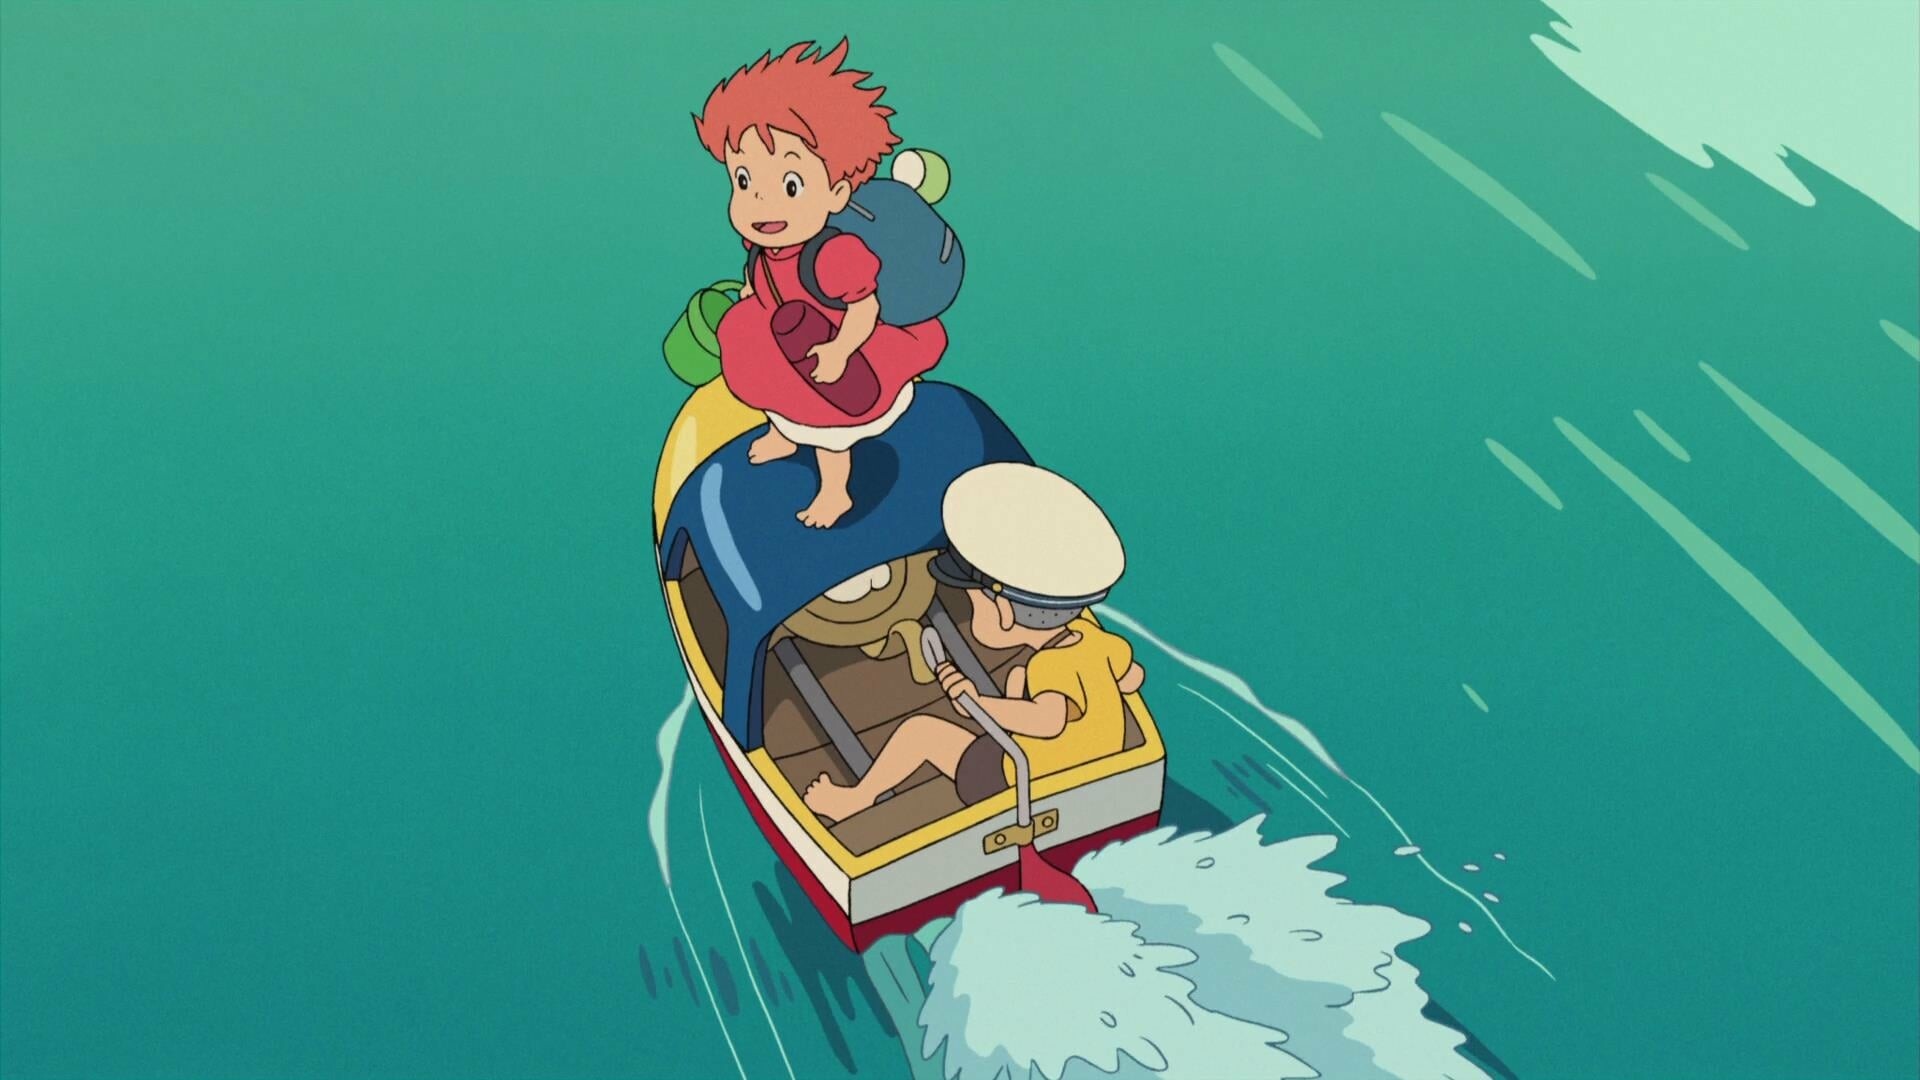 Ponyo: A 2008 animated film by the well-known Studio Ghibli, directed by Hayao Miyazaki. 1920x1080 Full HD Wallpaper.